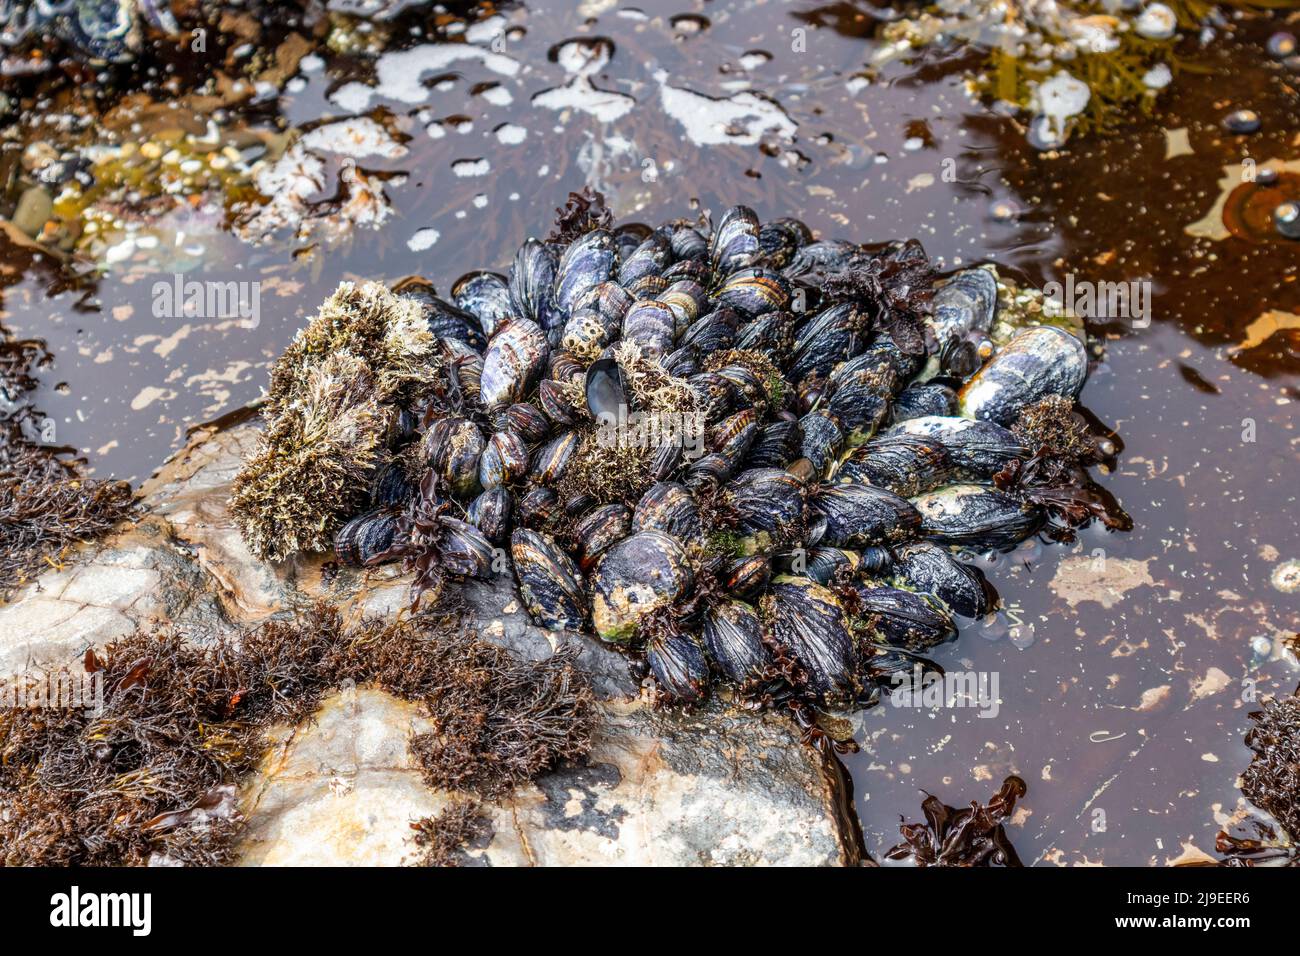 Wild black mussels growing close together on coastal rocks in J V Fitzgerald Marine Reserve, California Stock Photo